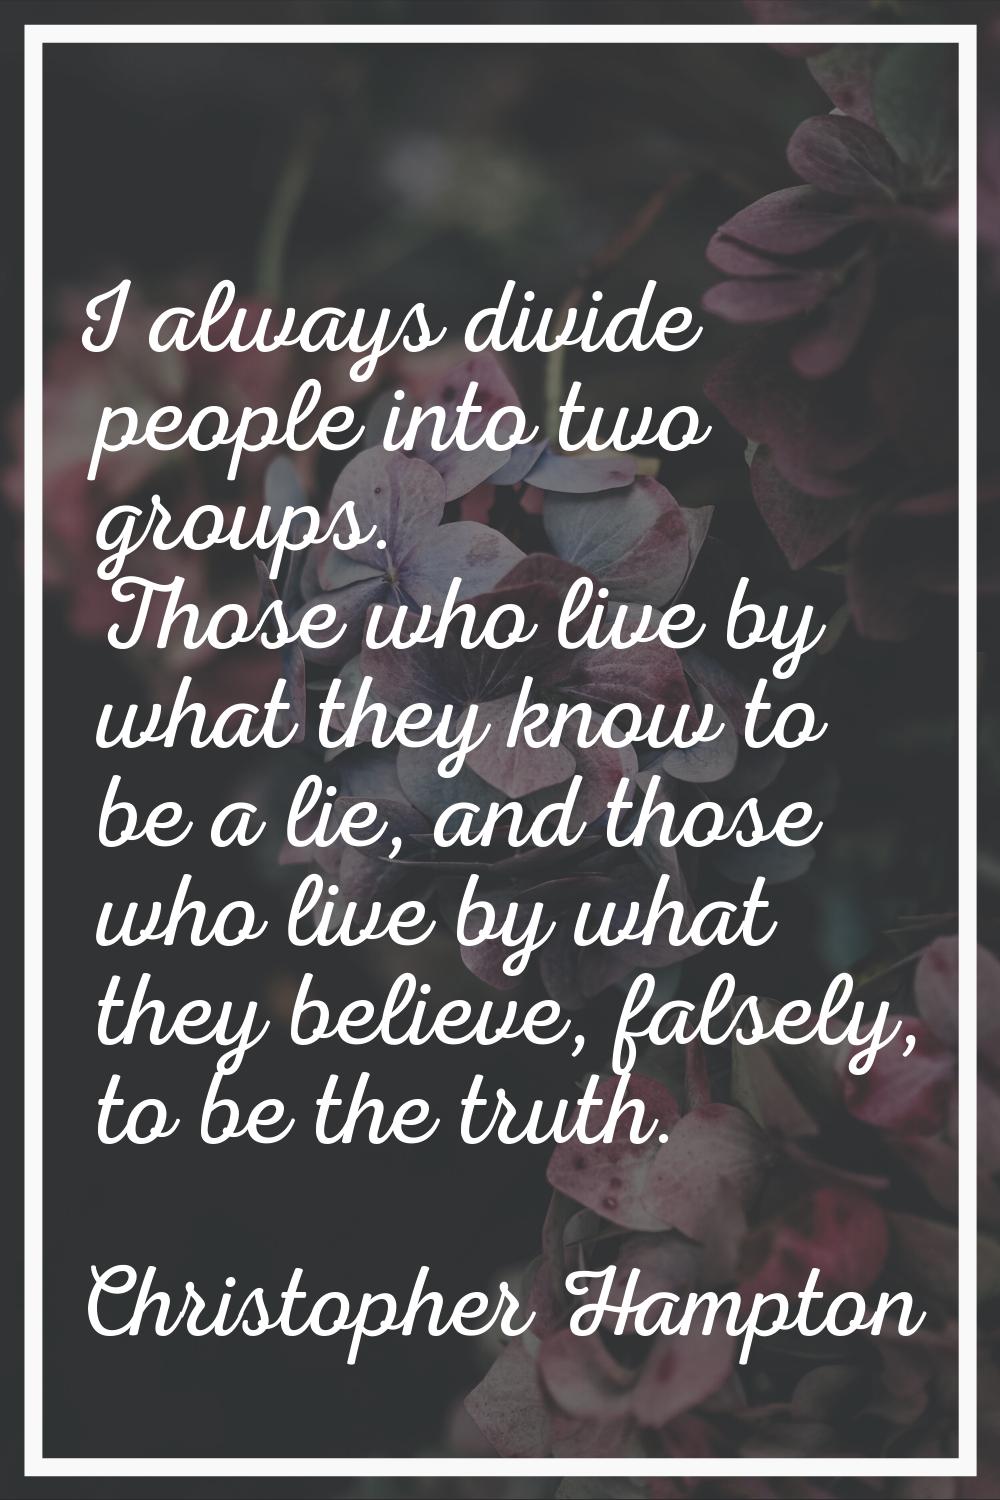 I always divide people into two groups. Those who live by what they know to be a lie, and those who